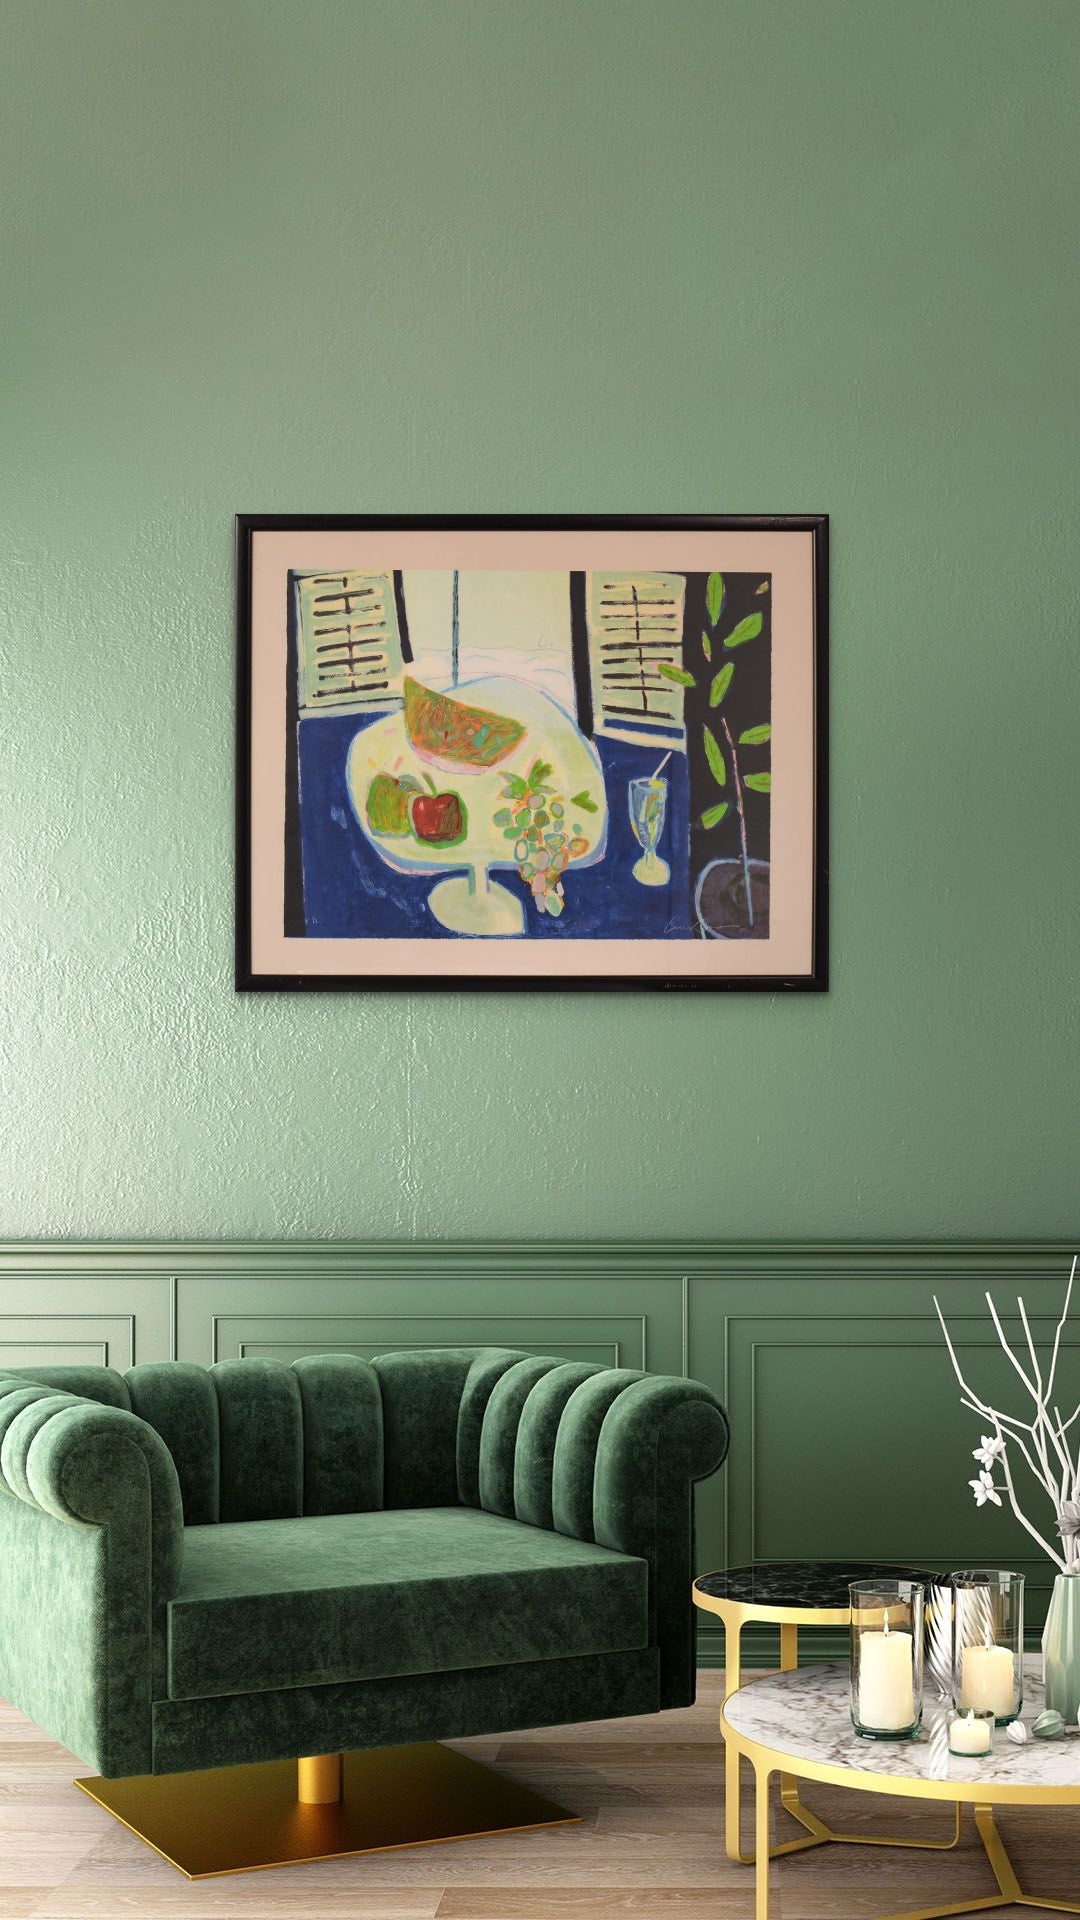 Still Life with Fruit - Artist's Proof Lithograph